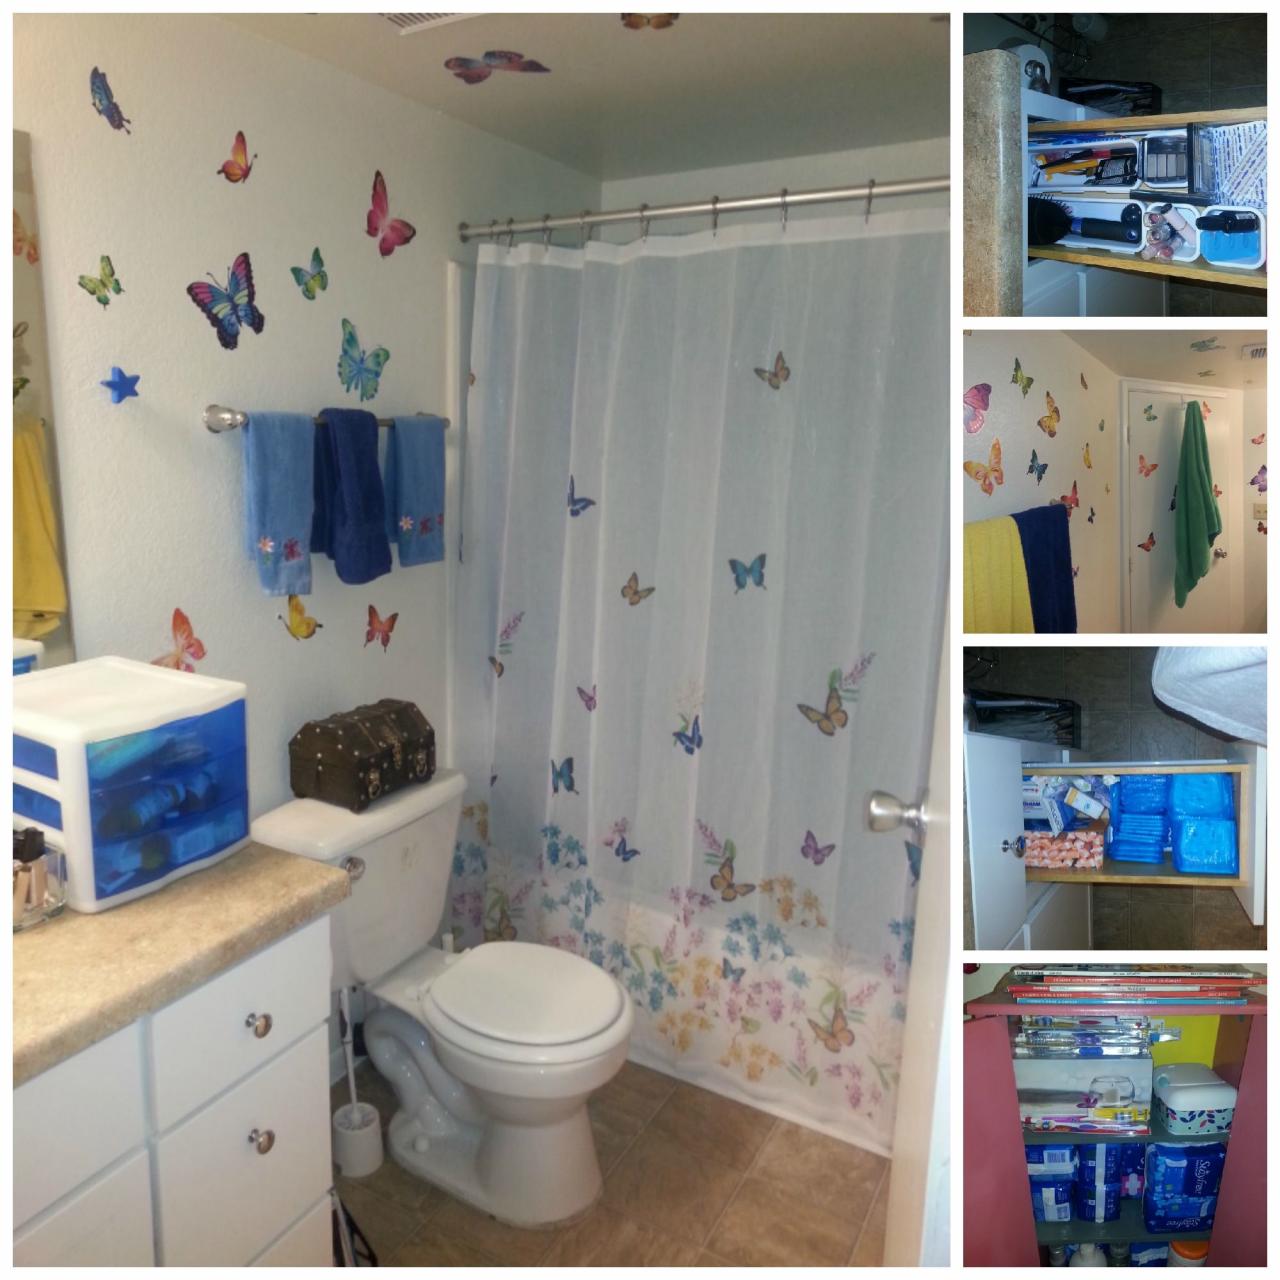 This is my butterfly bathroom. Butterflies make me happy. Organized and